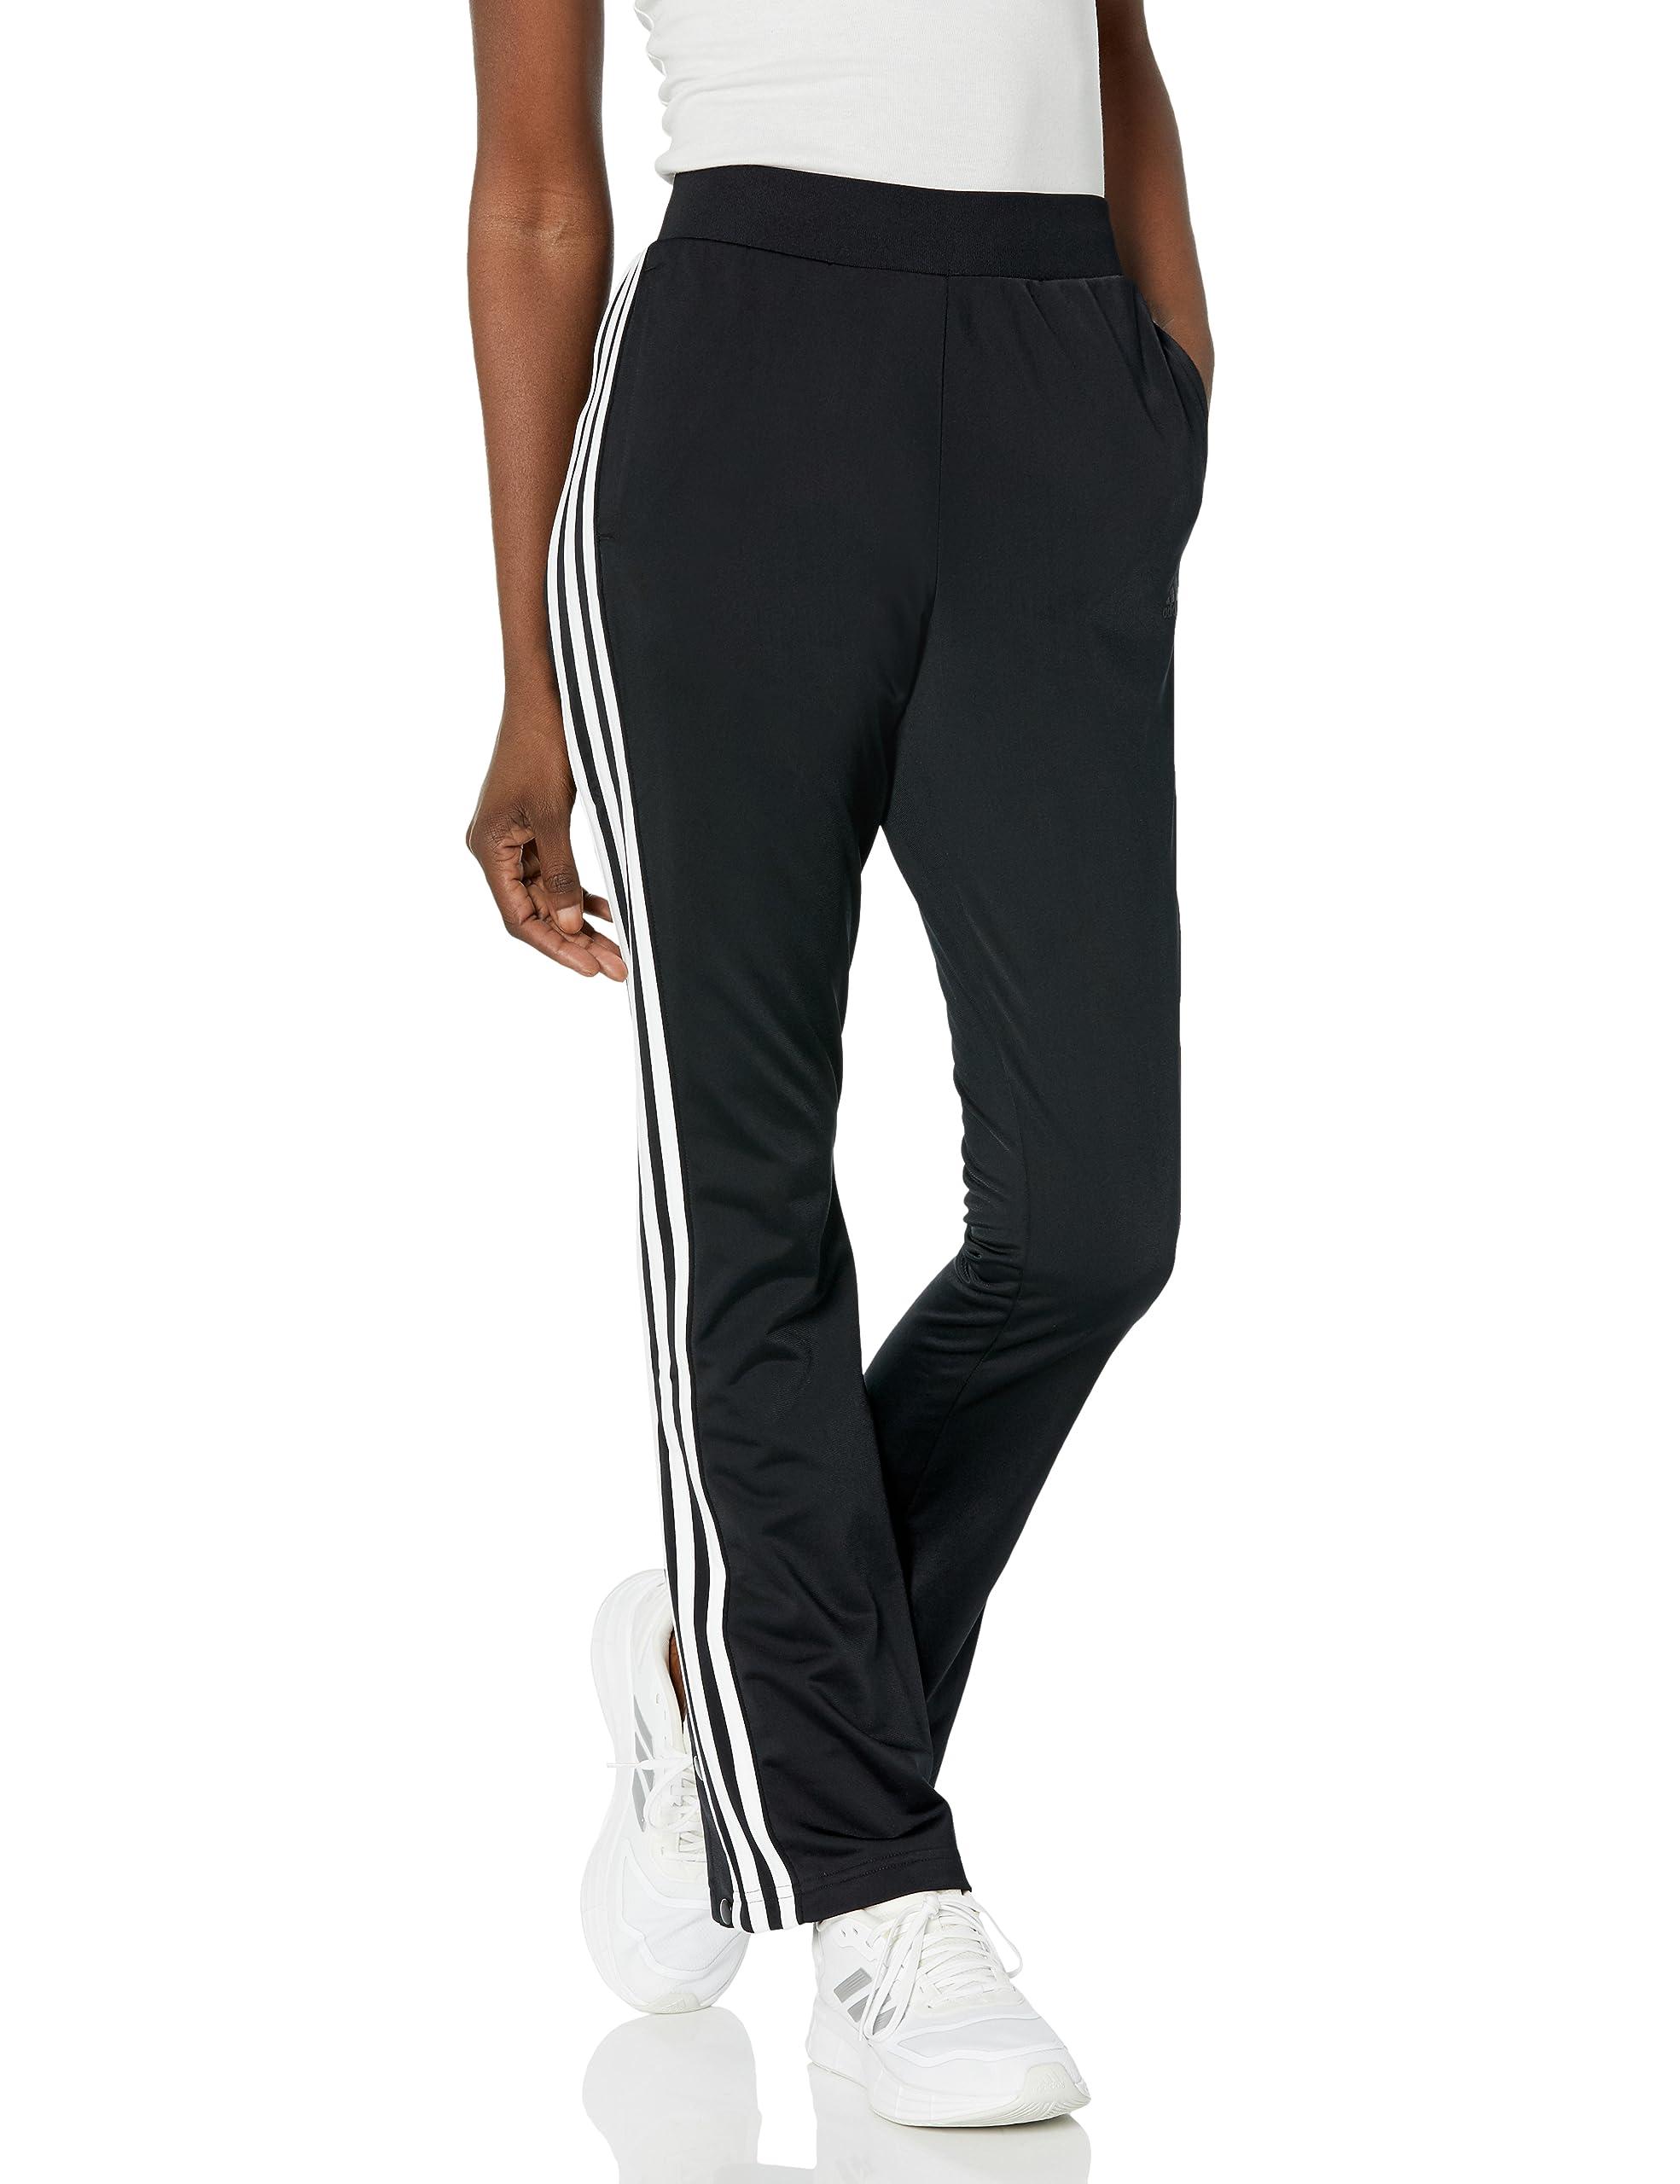 adidas S 1/4 Snap Tricot Pants in Black